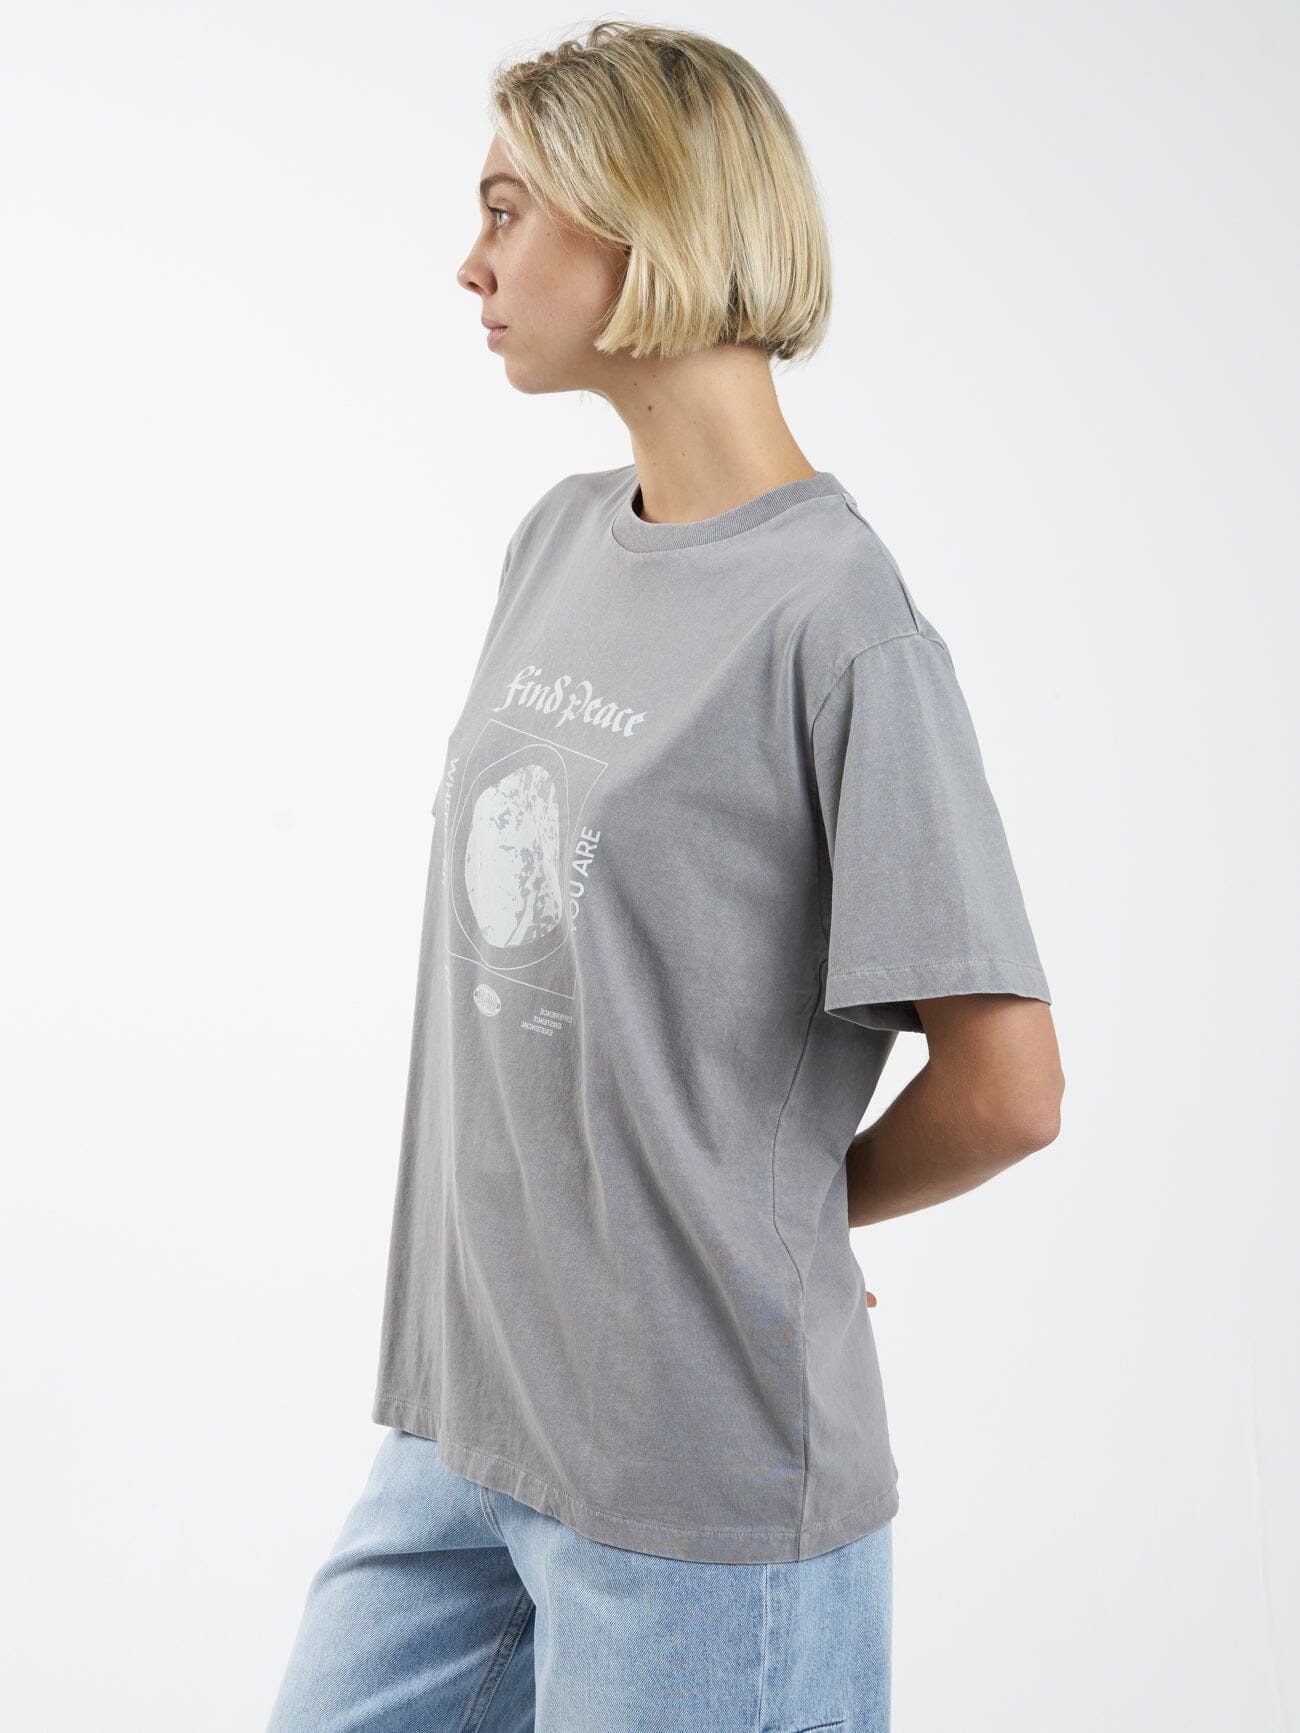 Find Peace Merch Fit Tee - Washed Gray